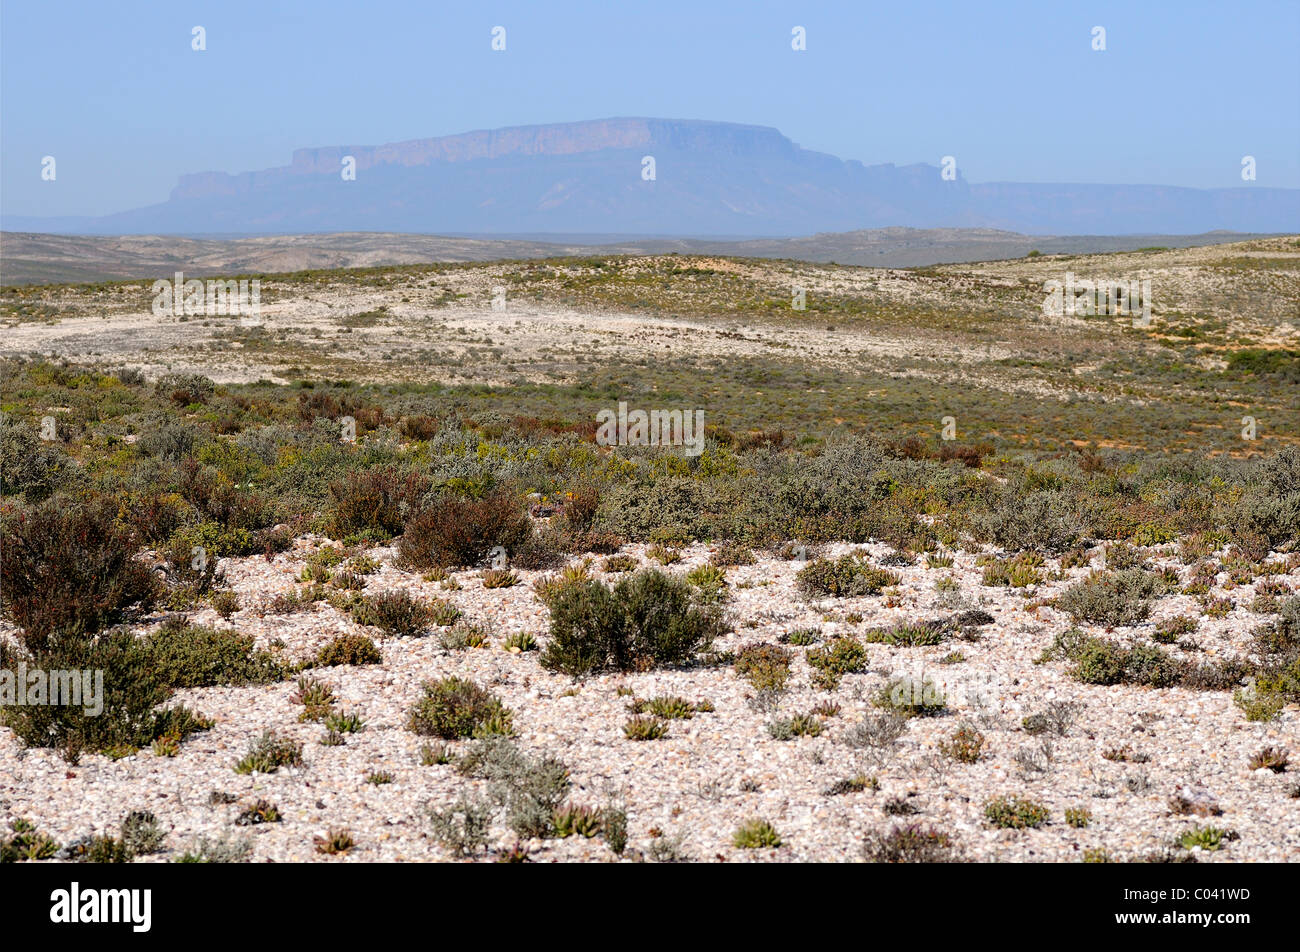 White quartz fields with typical succulent vegetation, Knersvlakte as part of the succulent karoo, Namaqualand, South Africa Stock Photo